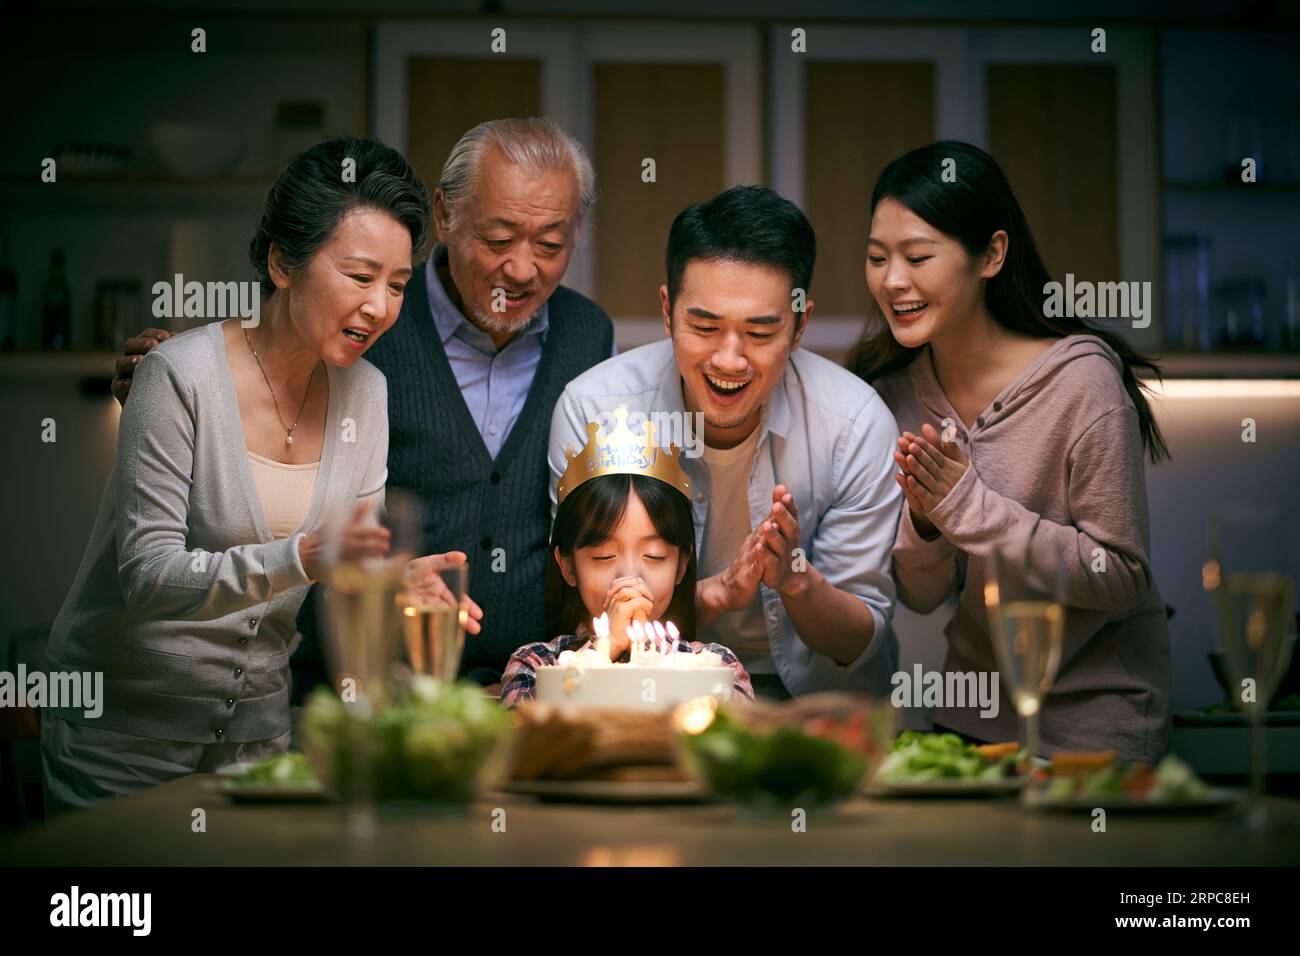 little asian girl making a wish while three generation family celebrating her birthday at home Stock Photo